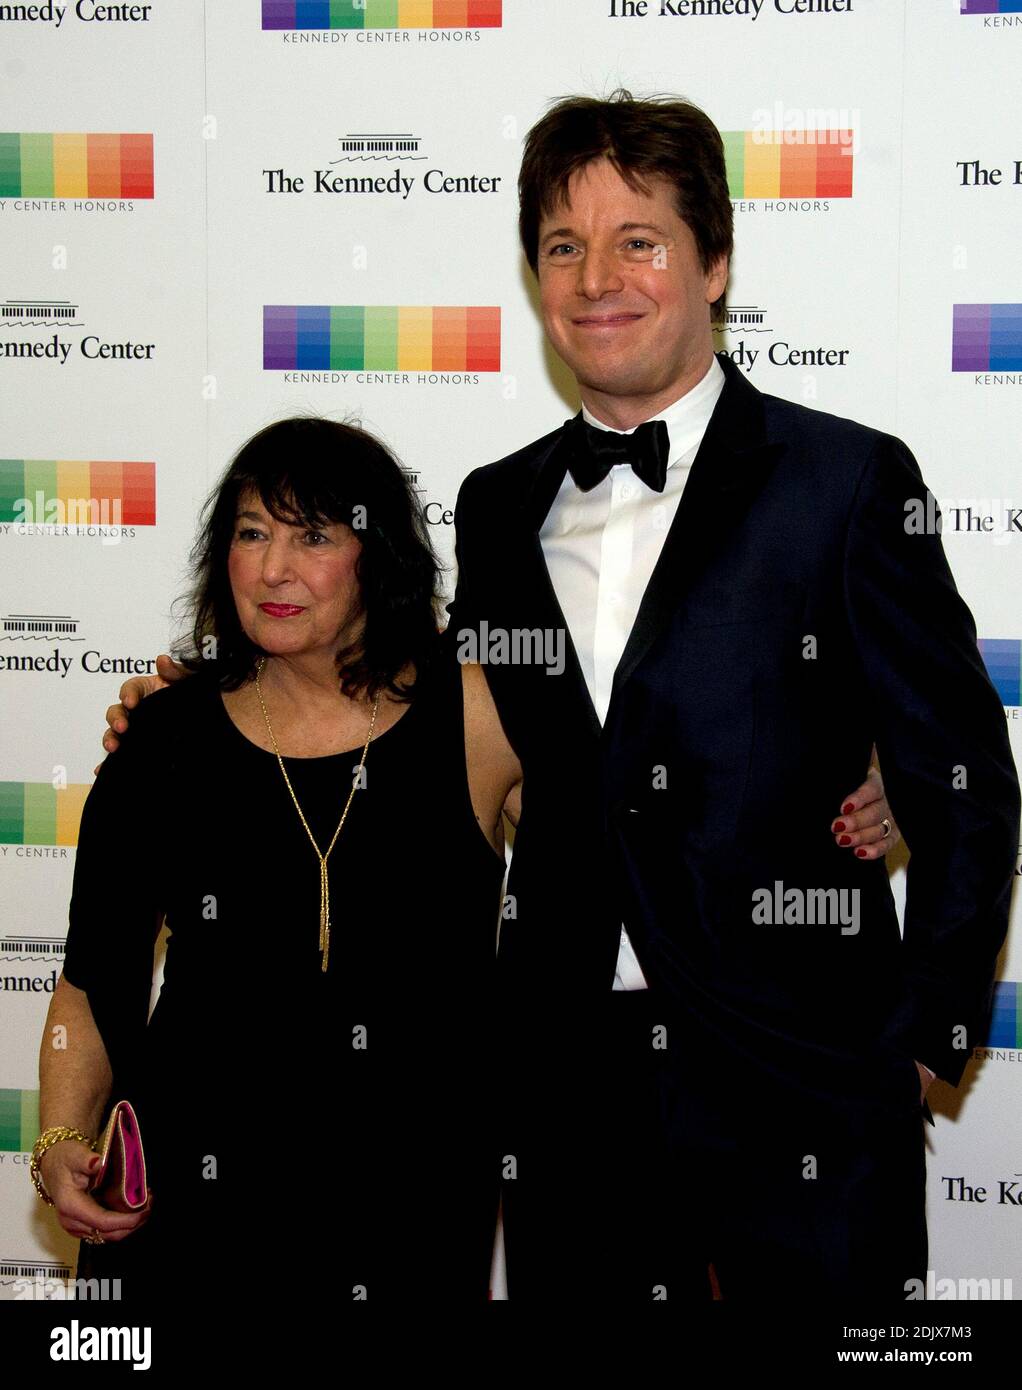 Violinist Joshua Bell and his mother, Shirley, arrive for the formal Artist's Dinner honoring the recipients of the 39th Annual Kennedy Center Honors hosted by United States Secretary of State John F. Kerry at the U.S. Department of State in Washington, D.C. on Saturday, December 3, 2016. The 2016 honorees are: Argentine pianist Martha Argerich; rock band the Eagles; screen and stage actor Al Pacino; gospel and blues singer Mavis Staples; and musician James Taylor. Photo by Ron Sachs /Pool via CNP/ABACAPRESS.COM Stock Photo